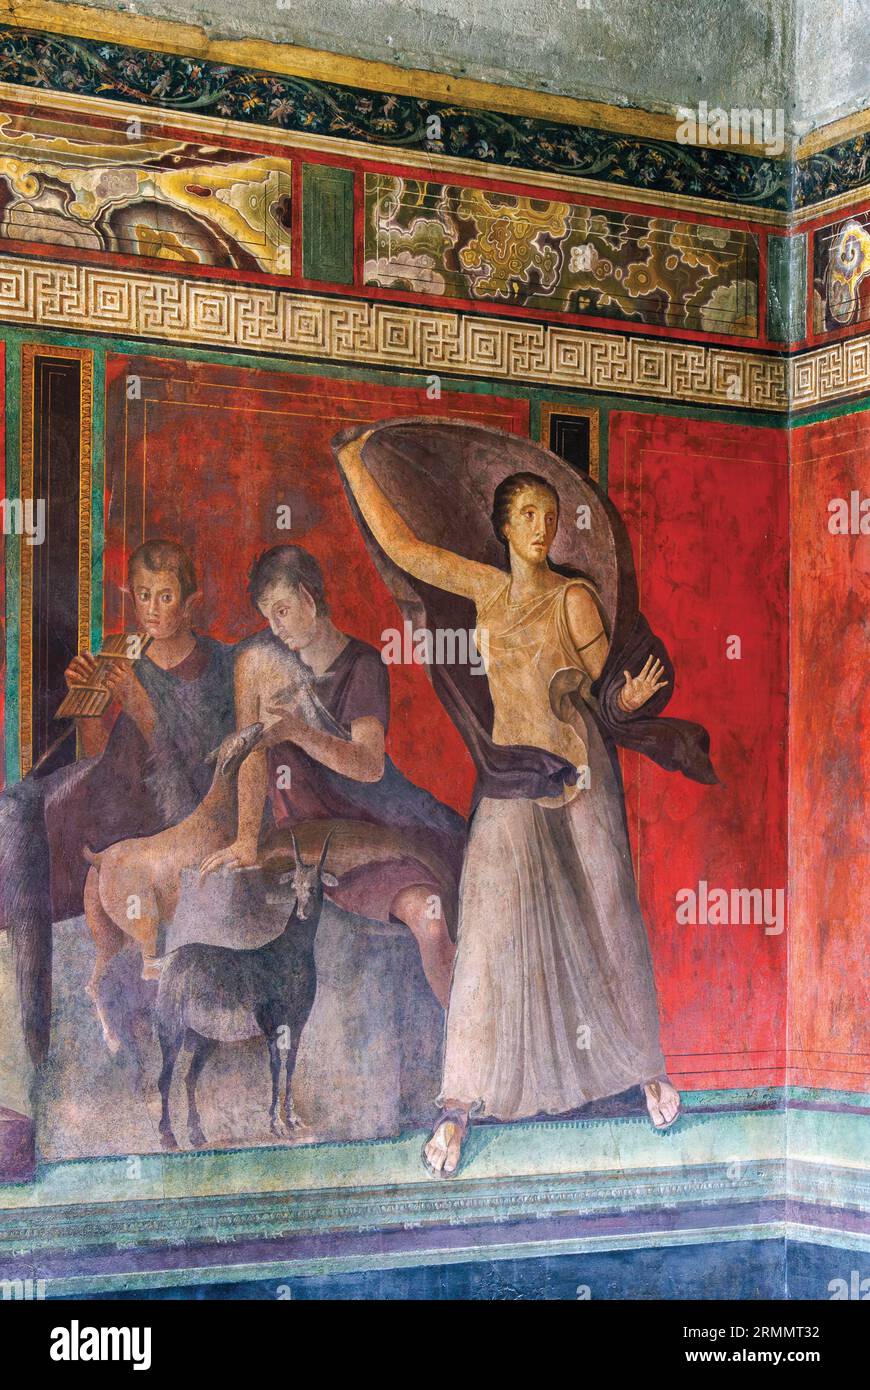 Pompeii Archaeological Site, Campania, Italy.  Paniskoi, mythological figures who lived in the woods, suckle a kid and play music, while on the right Stock Photo